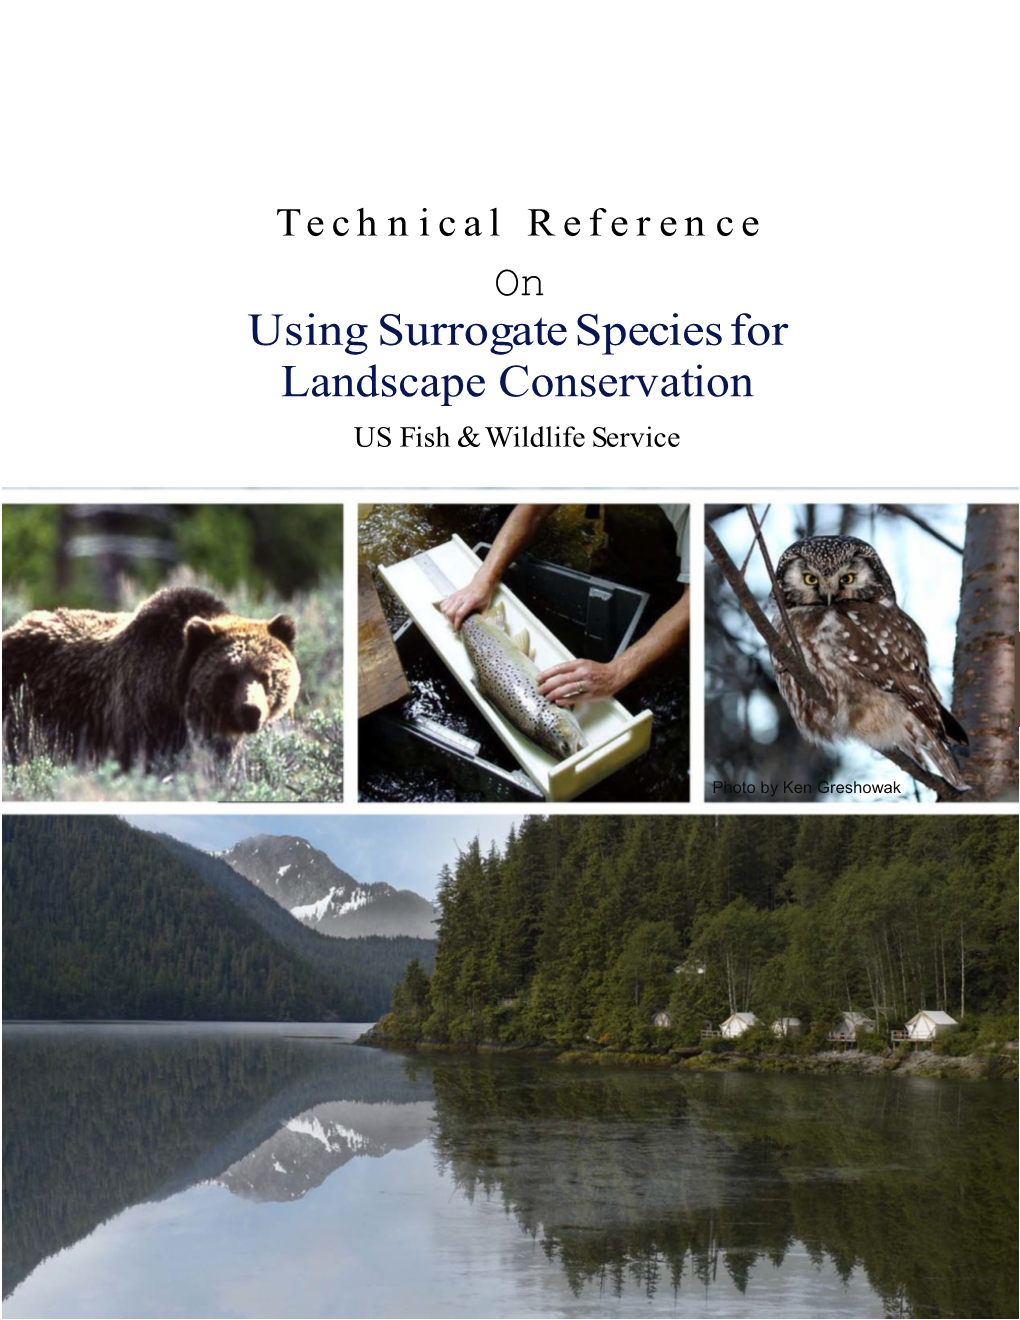 Technical Reference on Using Surrogate Species for Landscape Conservation US Fish & Wildlife Service 13 August 2015